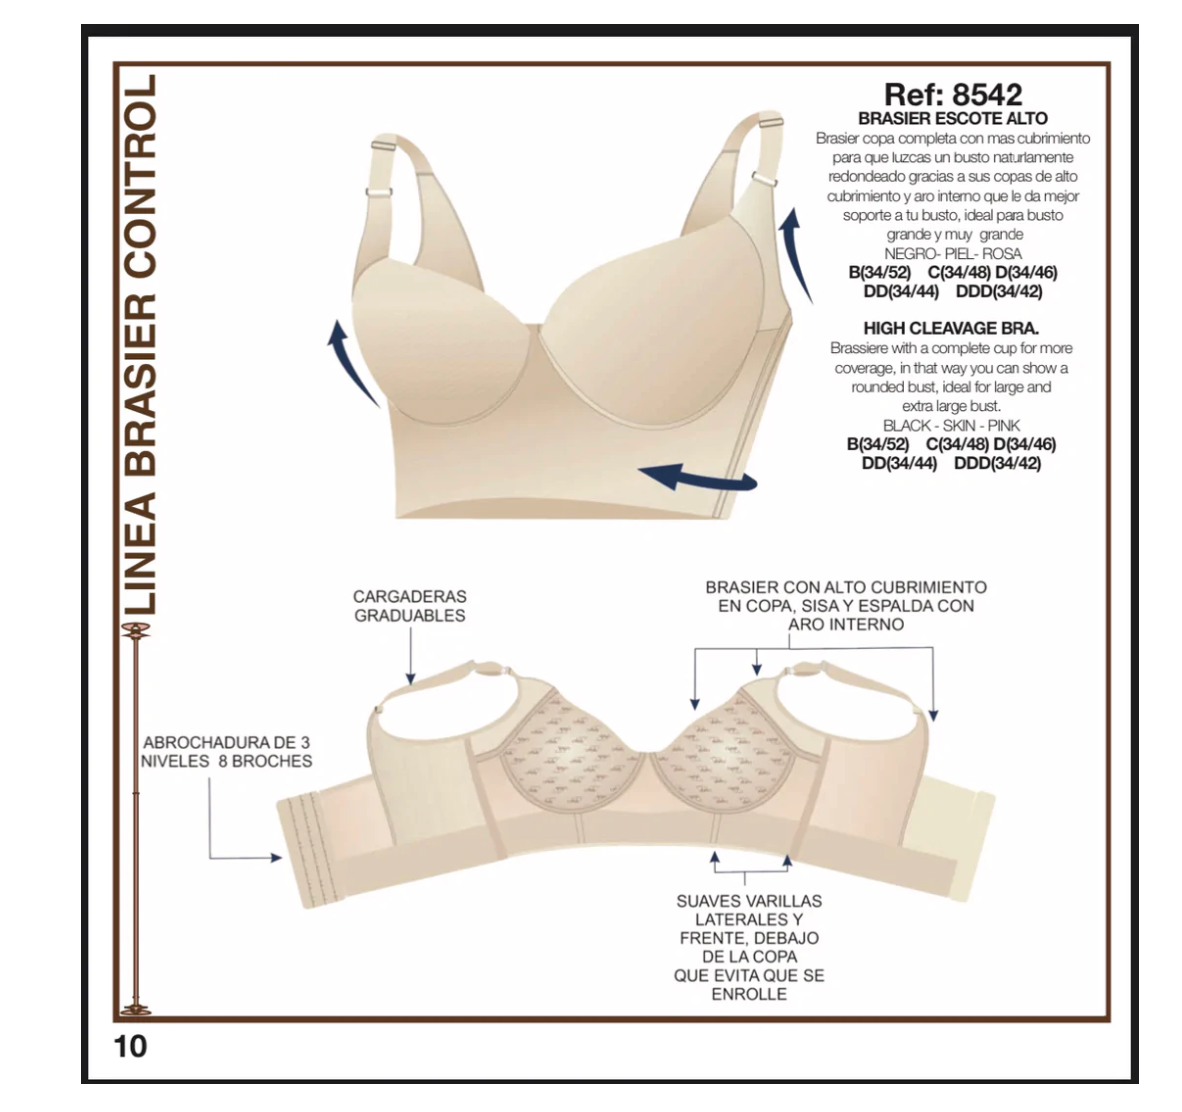 UPlady High Compression Extra Firm Full Cup Shape Push Up Bra Sz